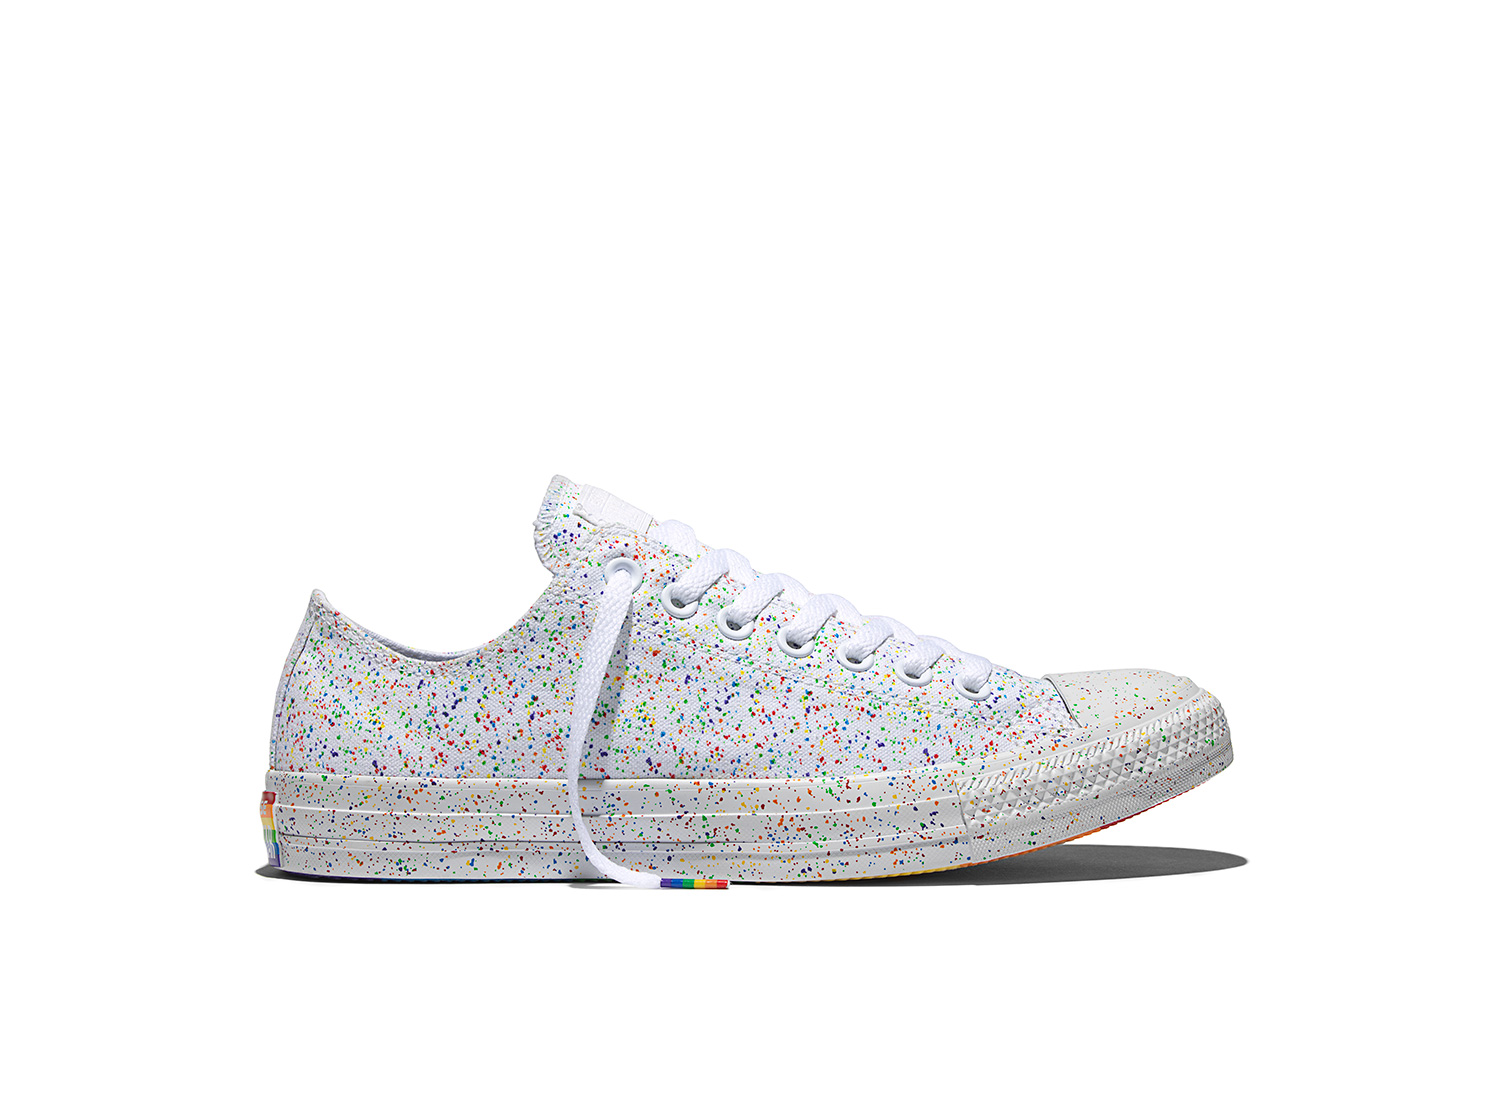 SS16_AS_Pride_WhiteOx_LATERAL